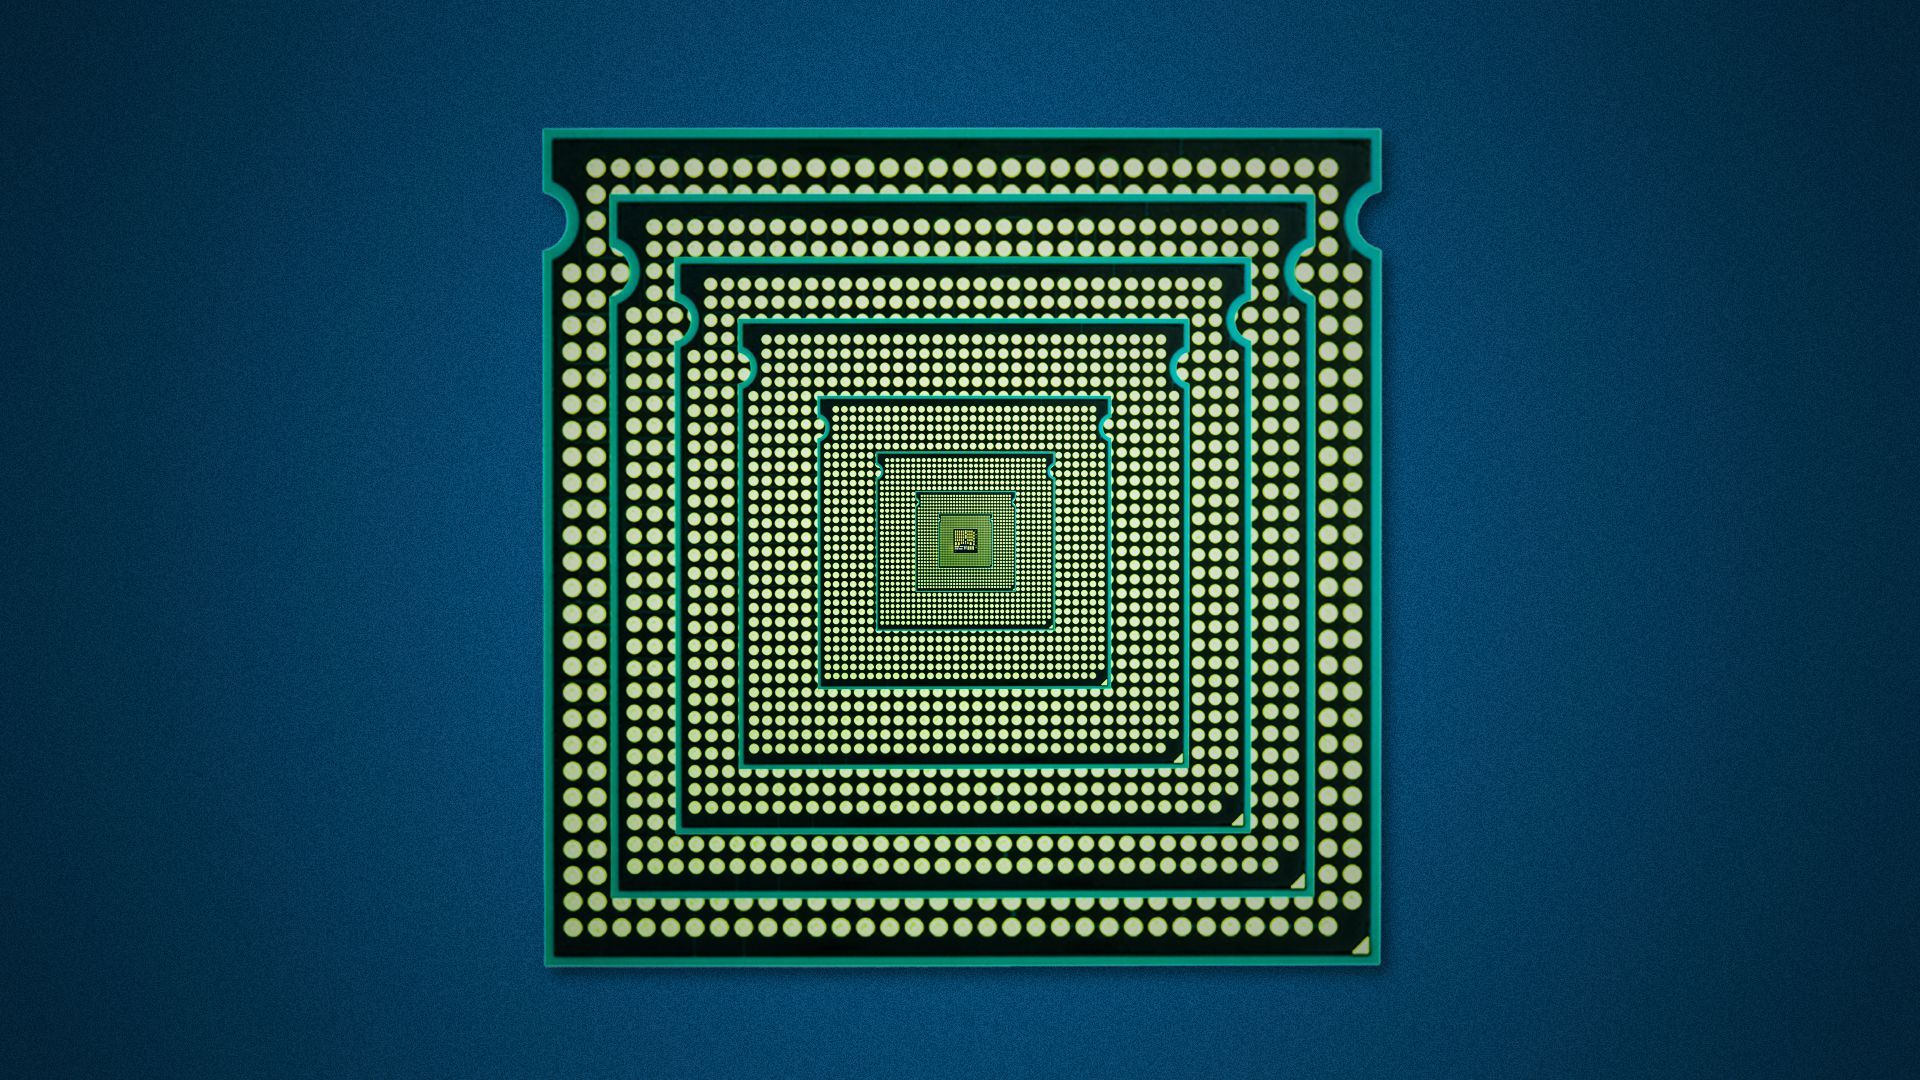 Illustration of an infinite, recursive tunnel of semiconductor chips.